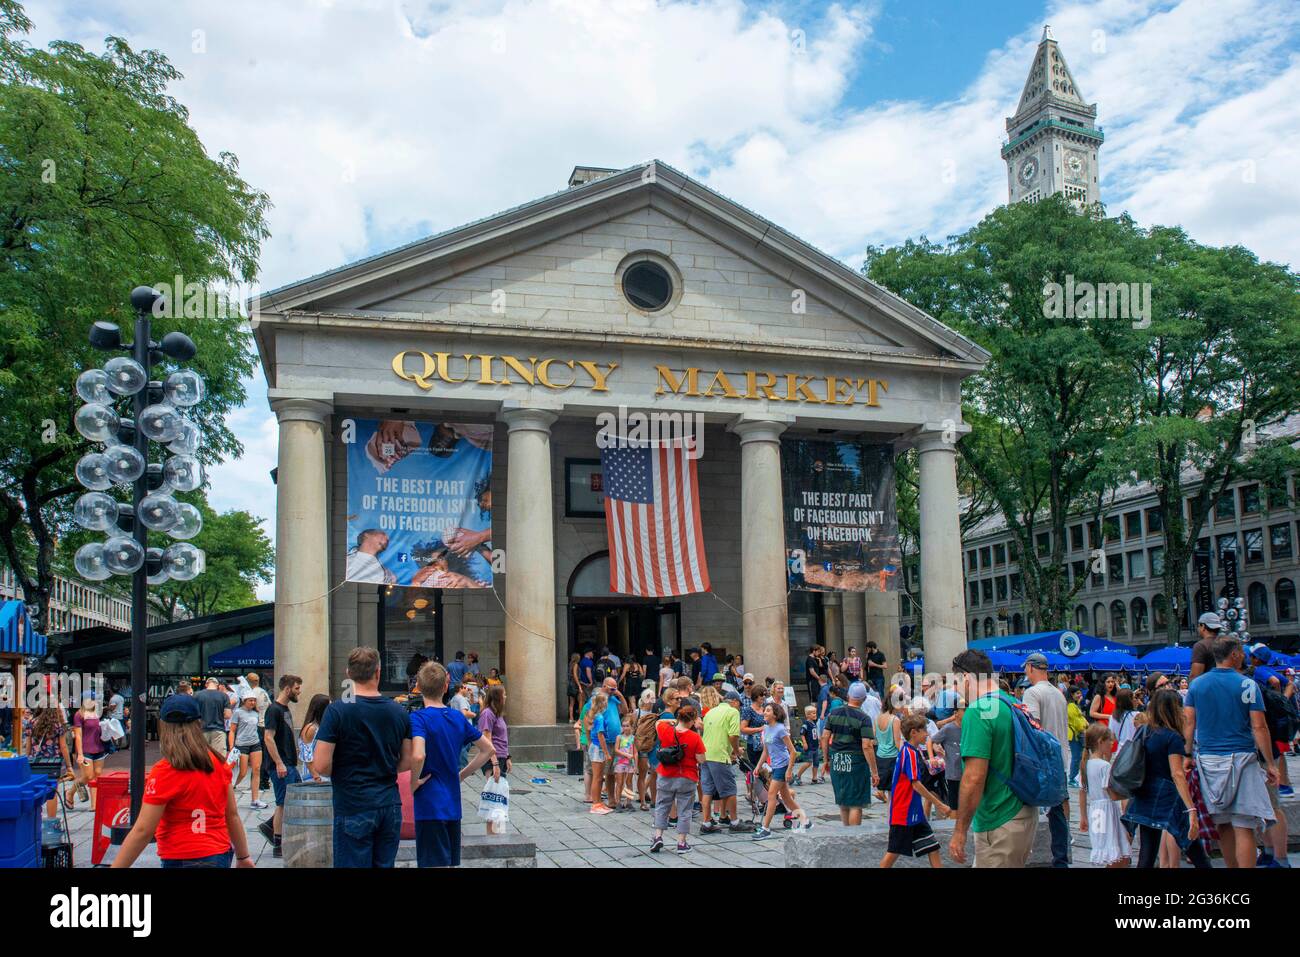 Quincy Market Freedom Trail Boston Massachusetts. Built in early 1800s as one of the largest market complexes in first half 19th century Stock Photo